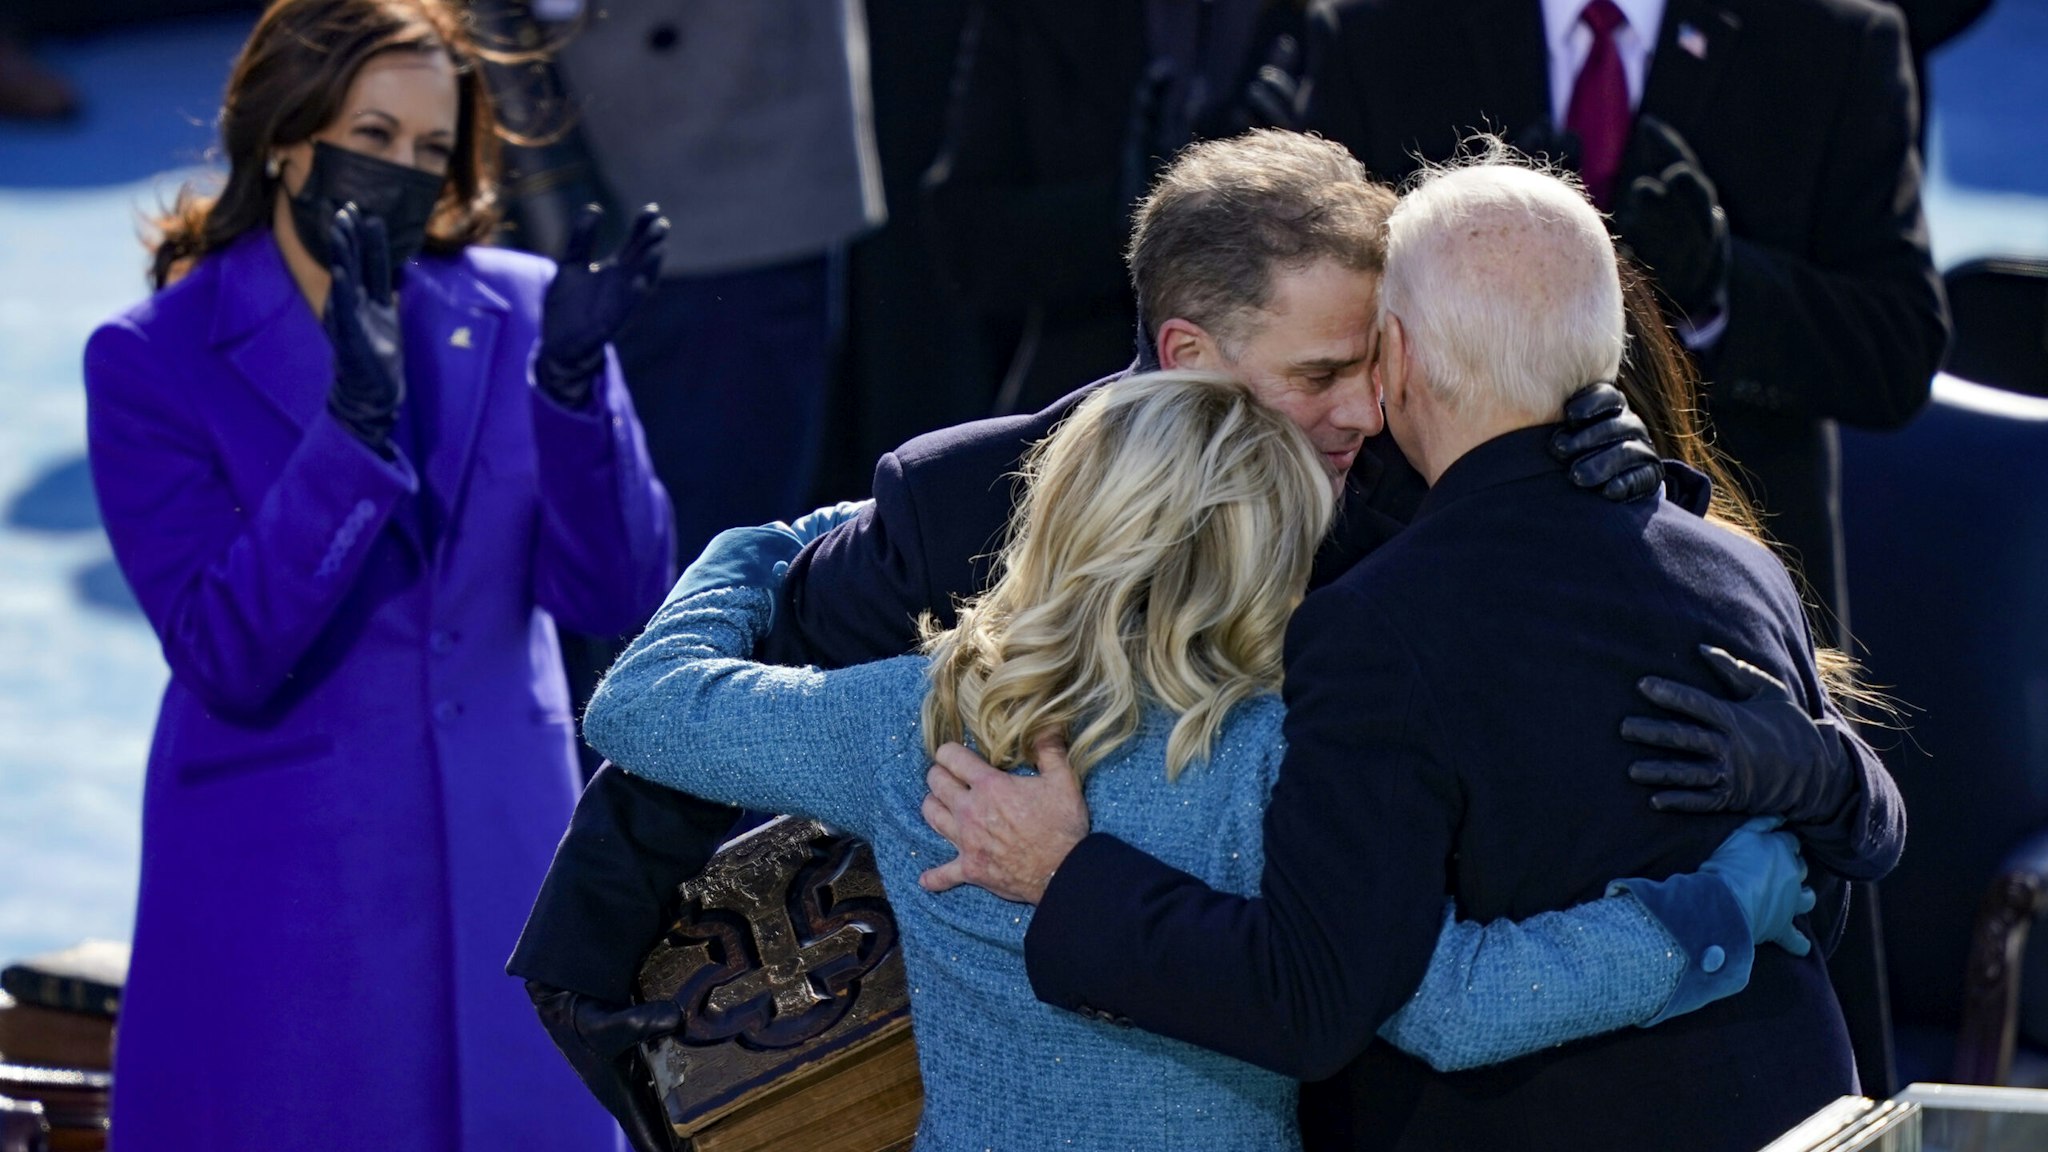 U.S. President Joe Biden embraces his family First Lady Dr. Jill Biden, son Hunter Biden and daughter Ashley after being sworn in during his inauguation on the West Front of the U.S. Capitol on January 20, 2021 in Washington, DC. During today's inauguration ceremony Joe Biden becomes the 46th president of the United States.